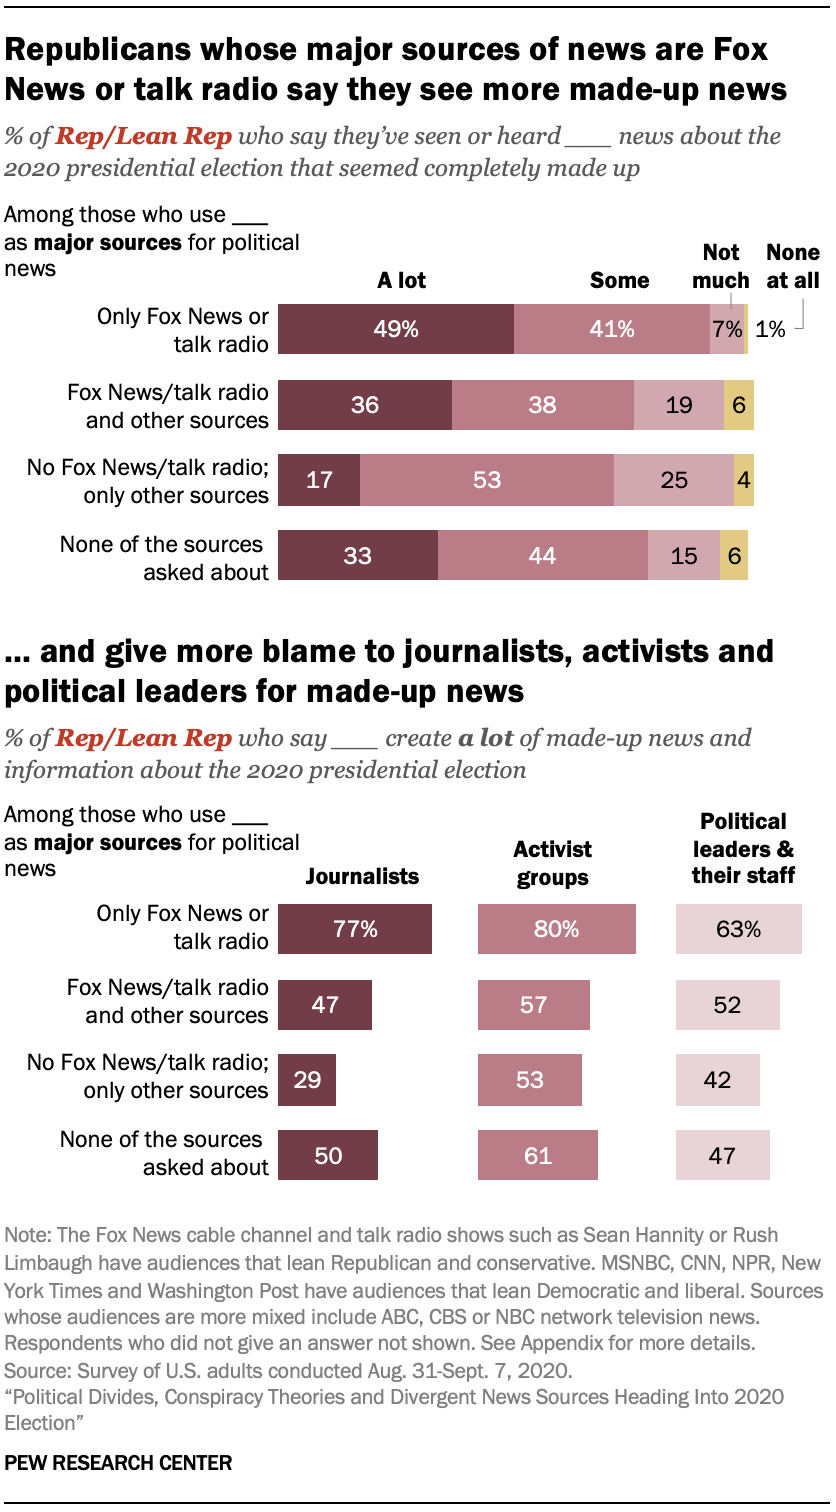 Republicans whose major sources of news are Fox News or talk radio say they see more made-up news